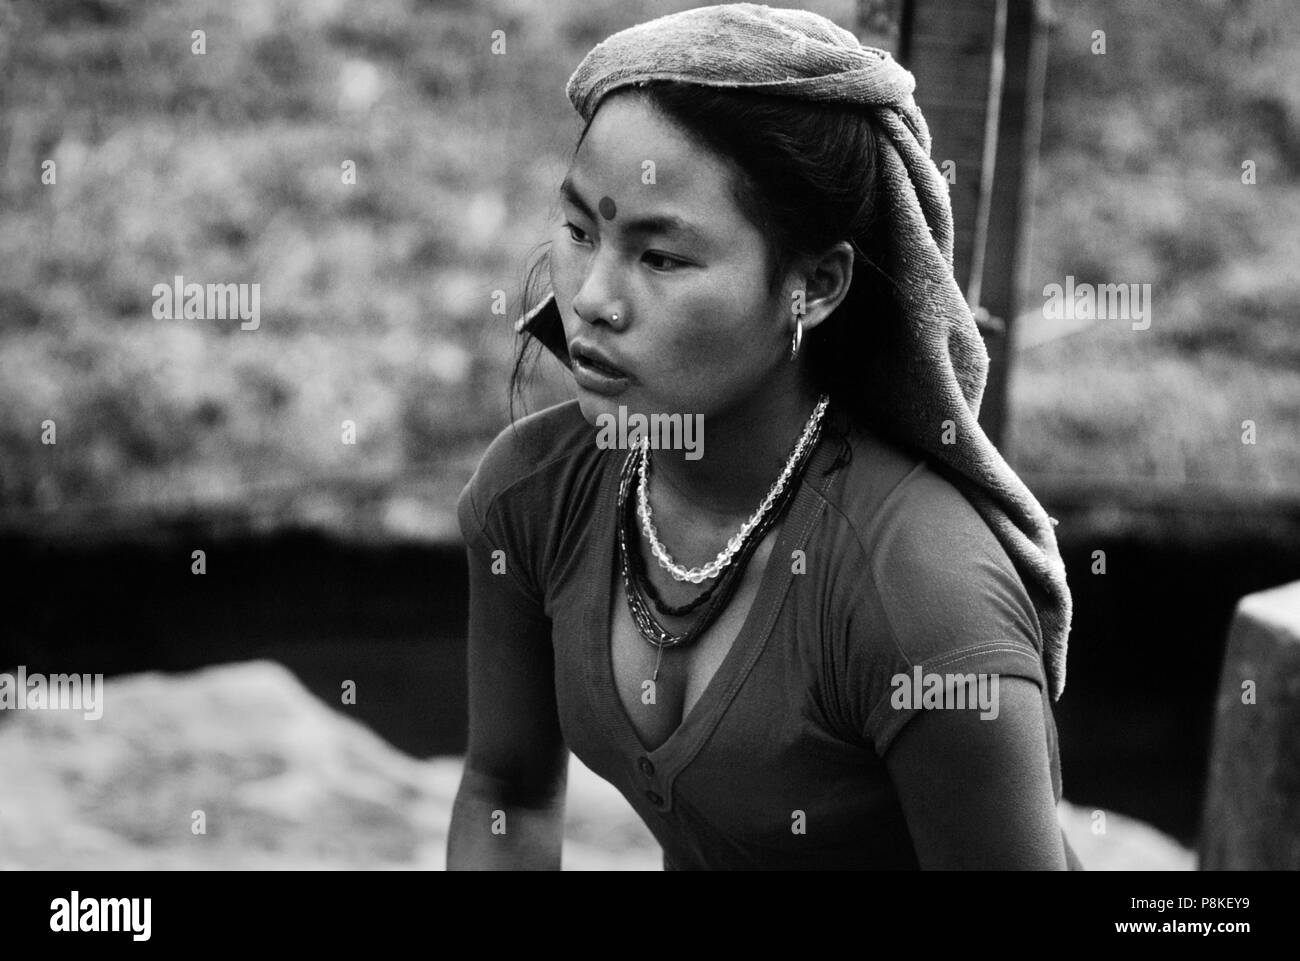 BEAUTIFUL YOUNG GURUNG WOMAN with nose ring and golden earring - ANNAPURNA REGION, CENTRAL NEPAL Stock Photo